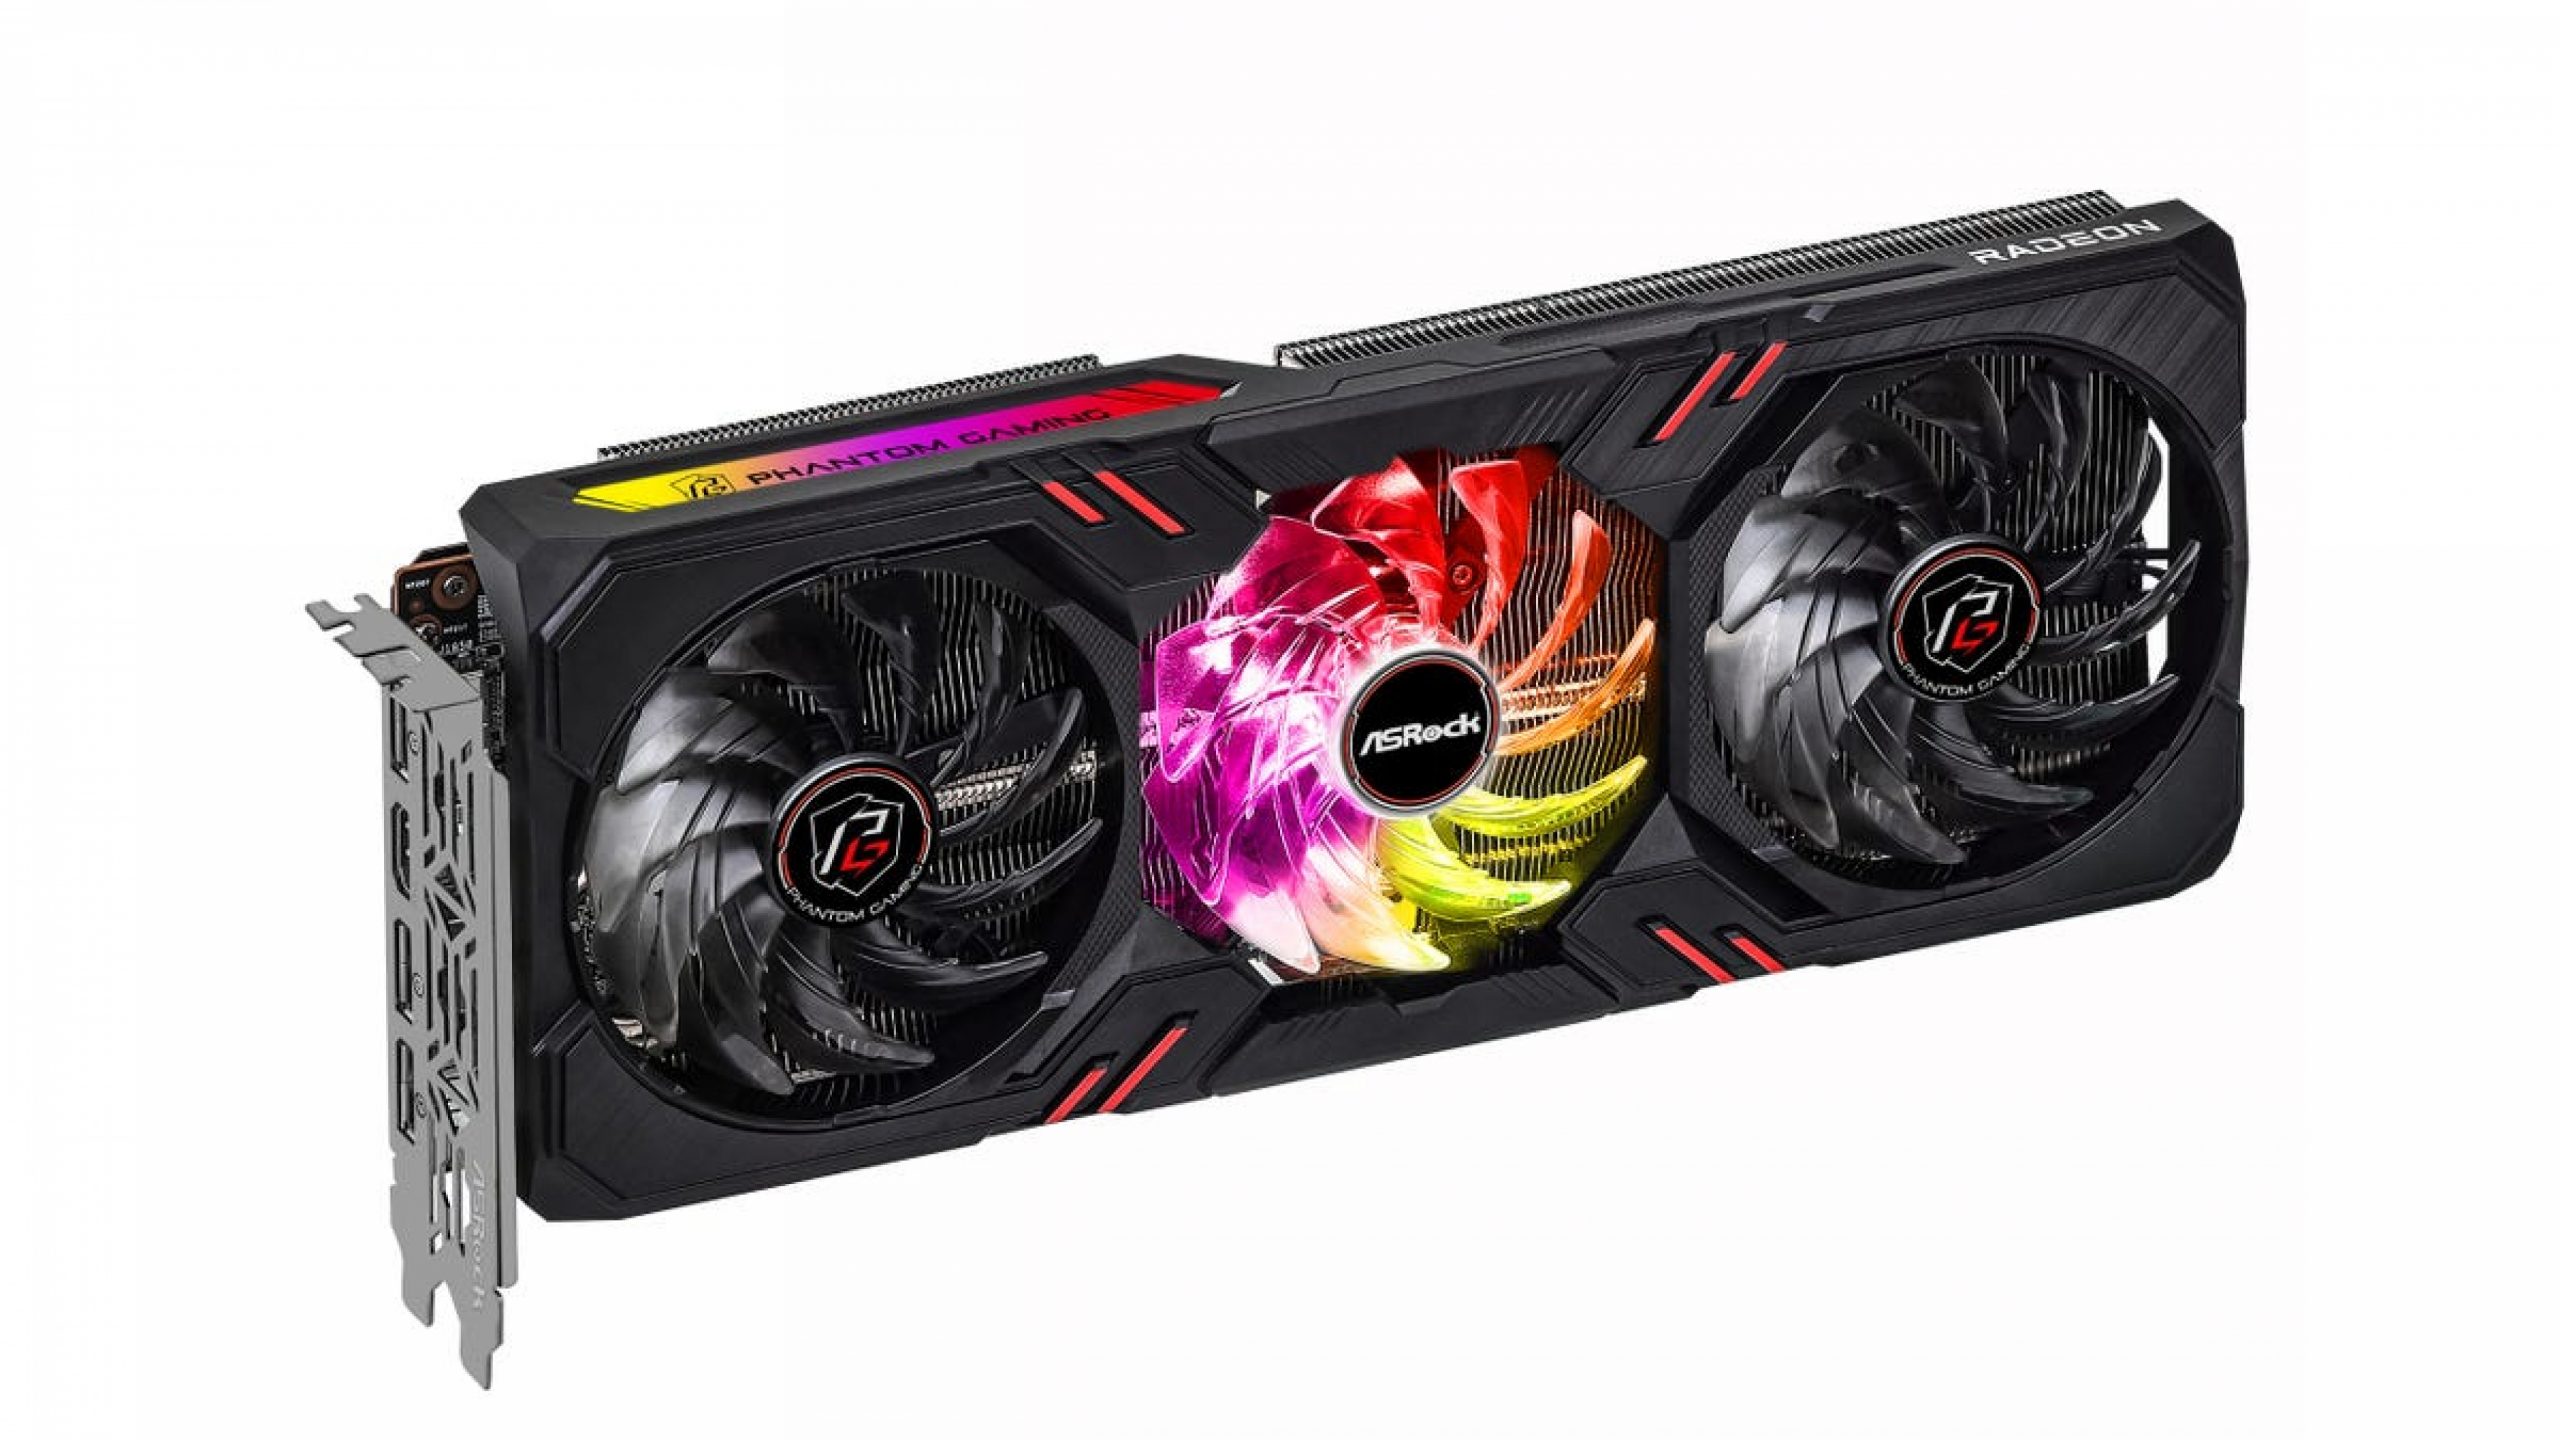 AMD’s Most Affordable 6000-Series GPU Is Here to Level Up 1080p Gaming